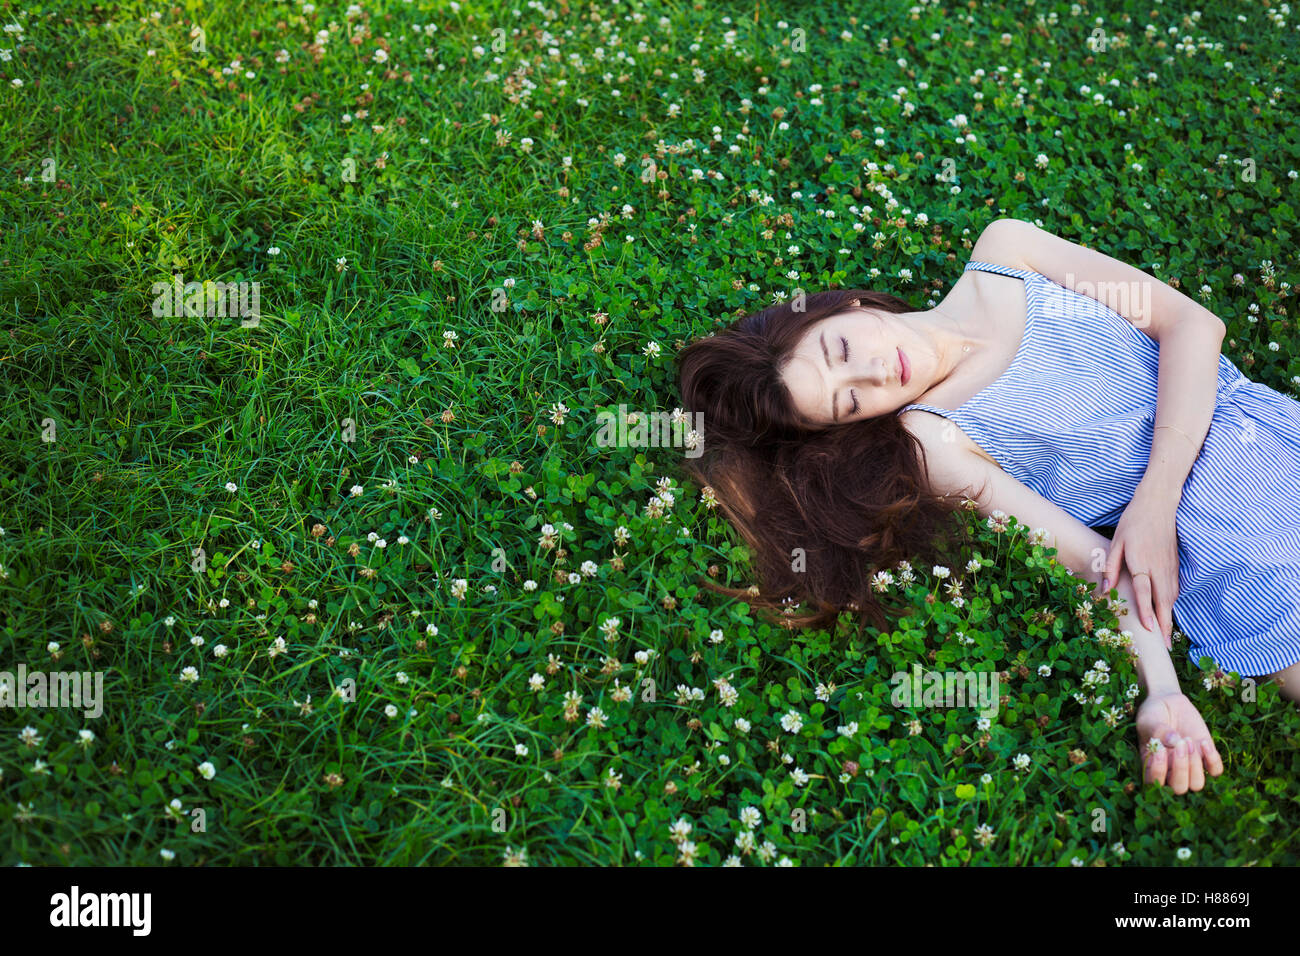 Young woman with long brown hair lying on a lawn. Stock Photo